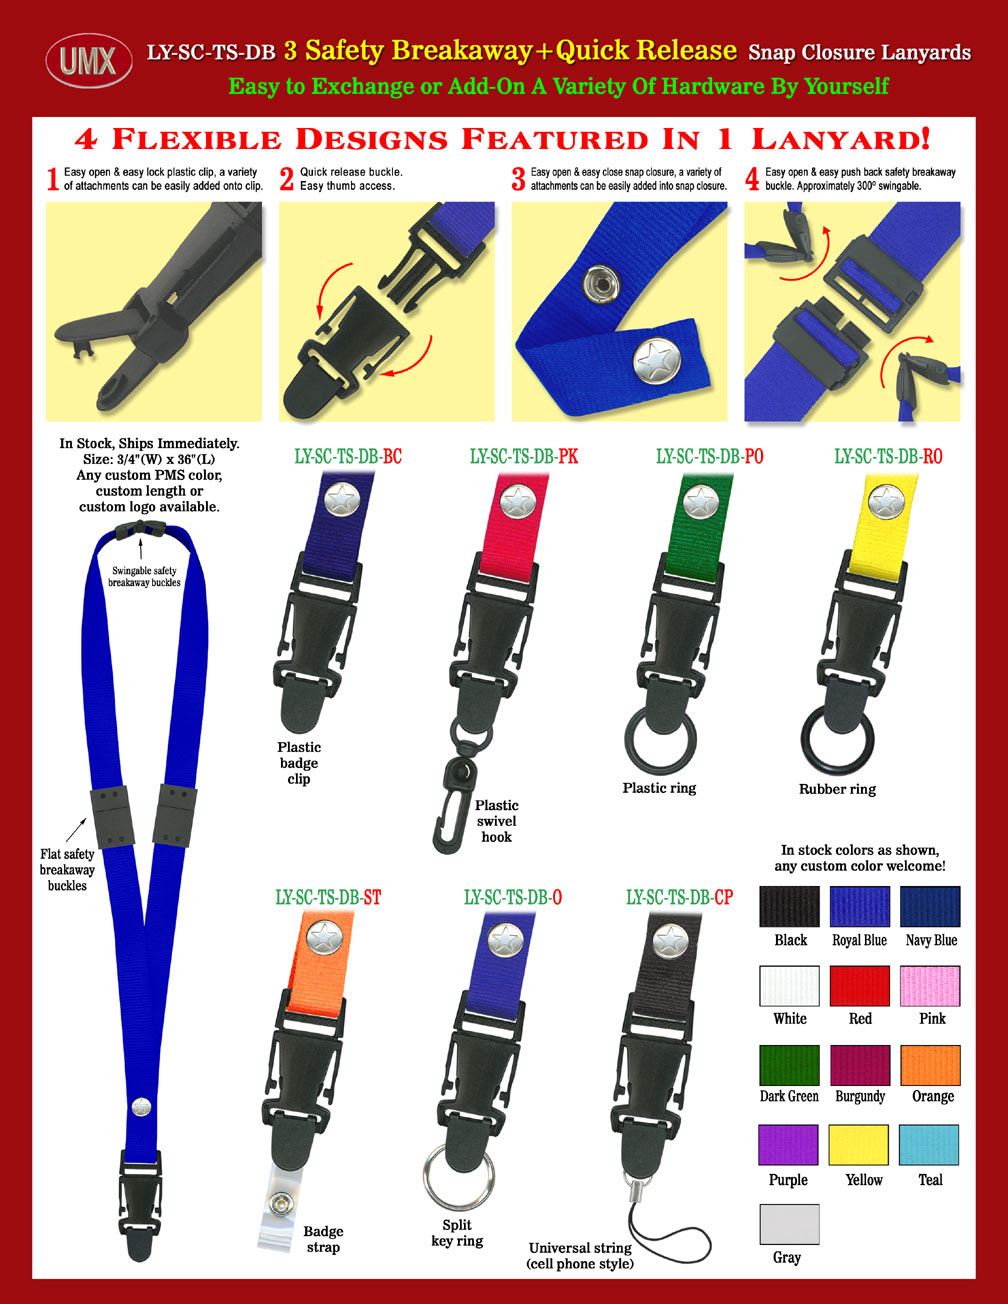 Great Lanyards for those working at hospital, jail, police department or mission critical environment! With Multiple Safety Protection!